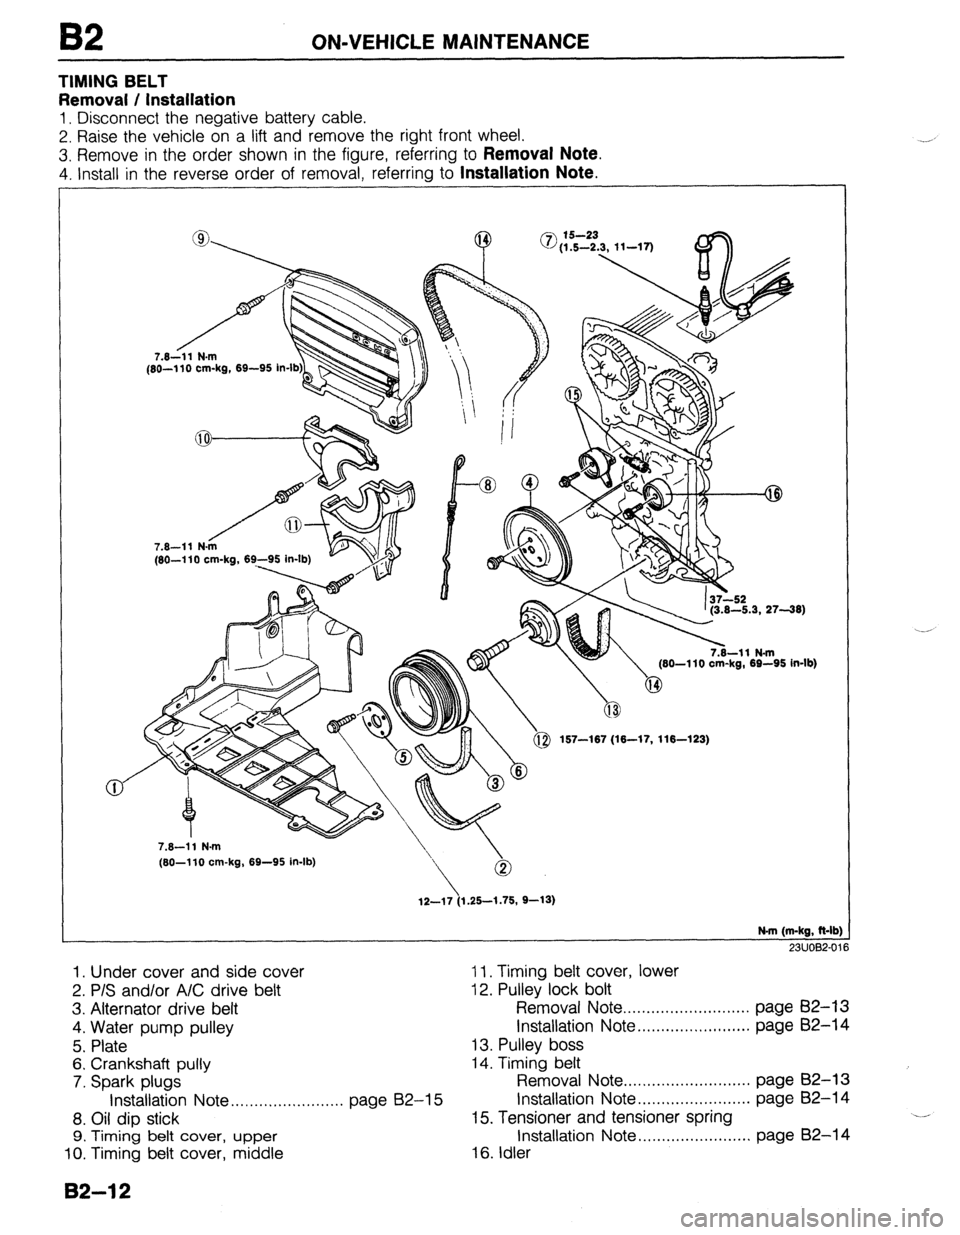 MAZDA PROTEGE 1992  Workshop Manual B2 ON-VEHICLE MAINTENANCE 
TIMING BELT 
Removal / Installation 
1. Disconnect the negative battery cable. 
2. Raise the vehicle on a lift and remove the right front wheel. 
3. Remove in the order show